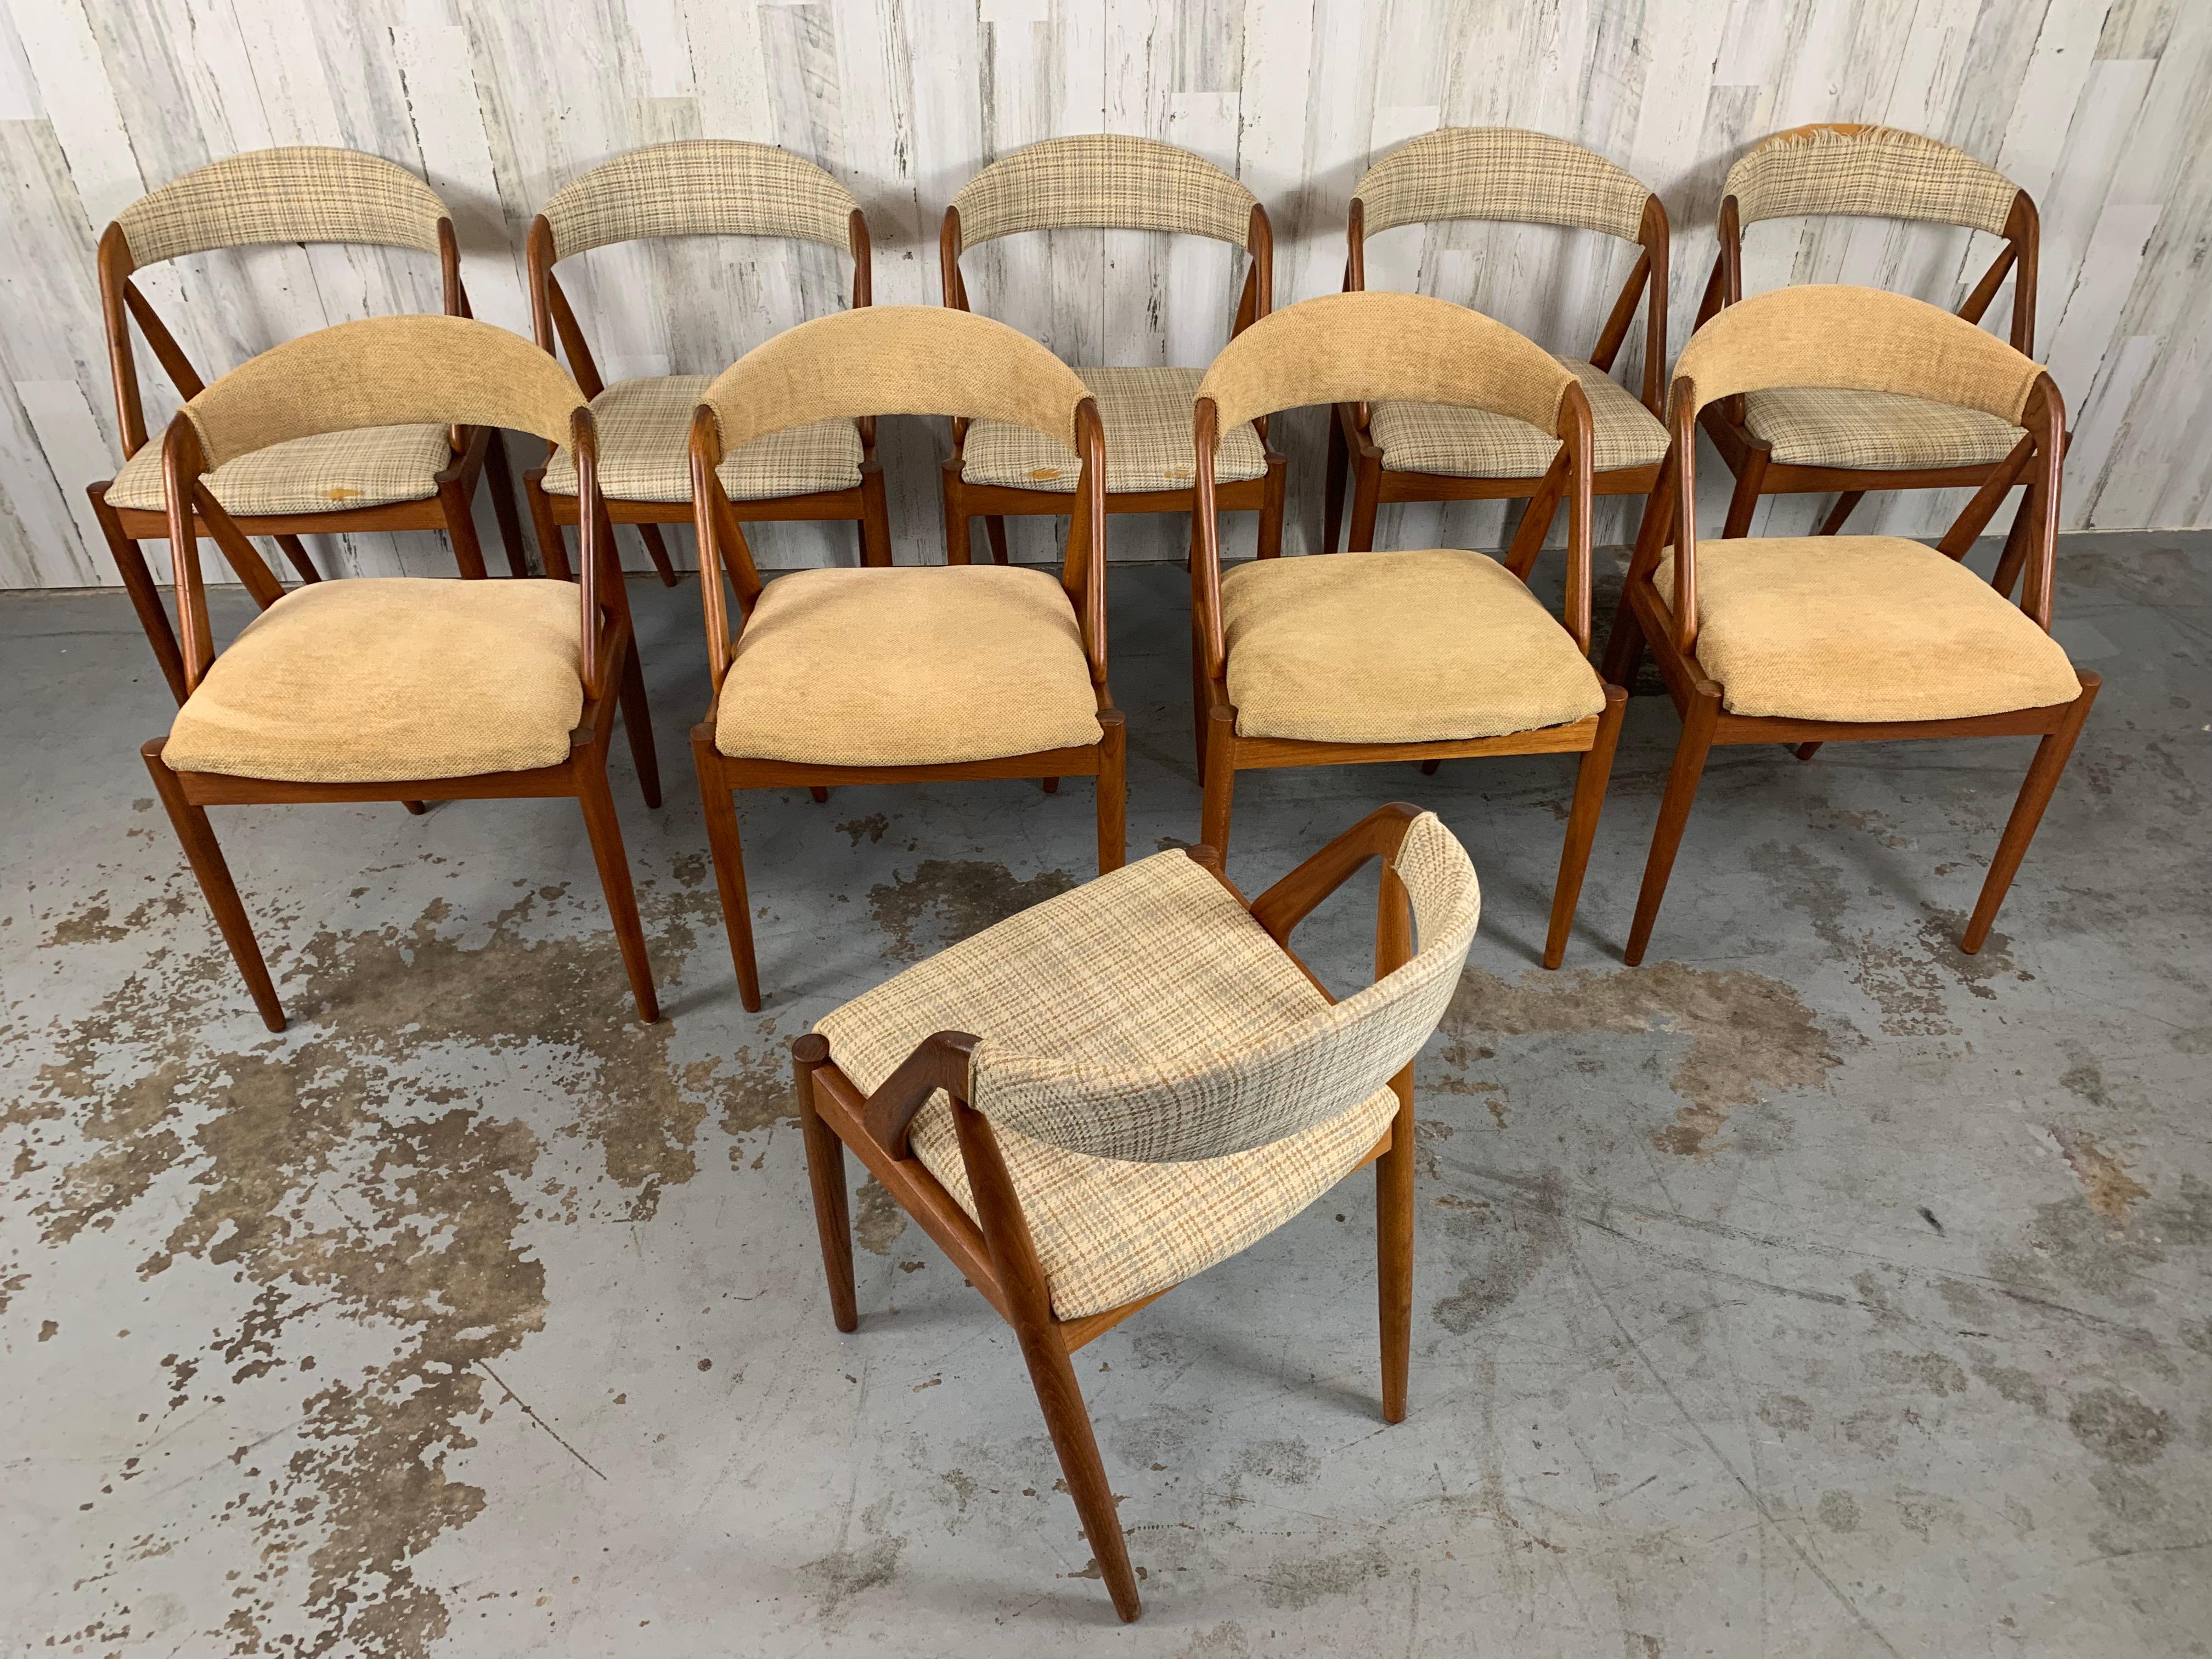 Hard to find A-frame model 31 dining chairs were designed by Kai Kristiansen in 1956 for Schou-Andersens Møbelfabrik and the Danish Modern  A-frame chair is one of the most well-known chairs designed by Kai Kristiansen  curved backrest with angular